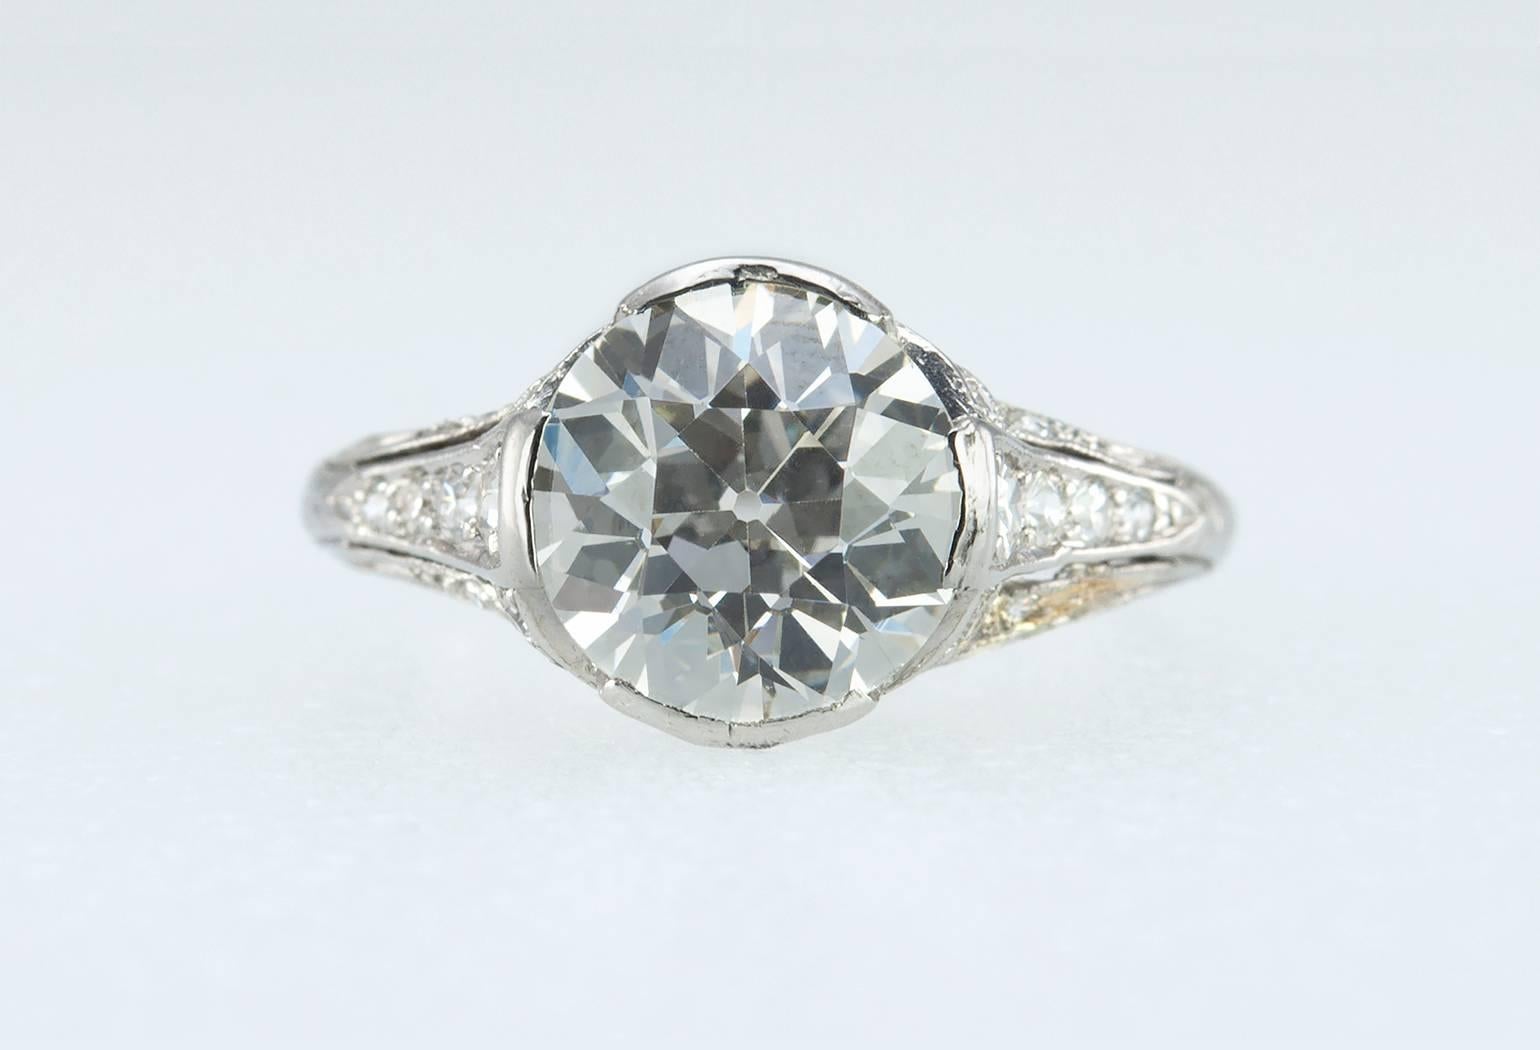 A gorgeous antique Edwardian platinum diamond engagement ring! This ring features a center 2.20 carat Old European Cut diamond that is K in color and VS1 in clarity (per EGL certificate).  There are an additional 36 single cut diamonds set